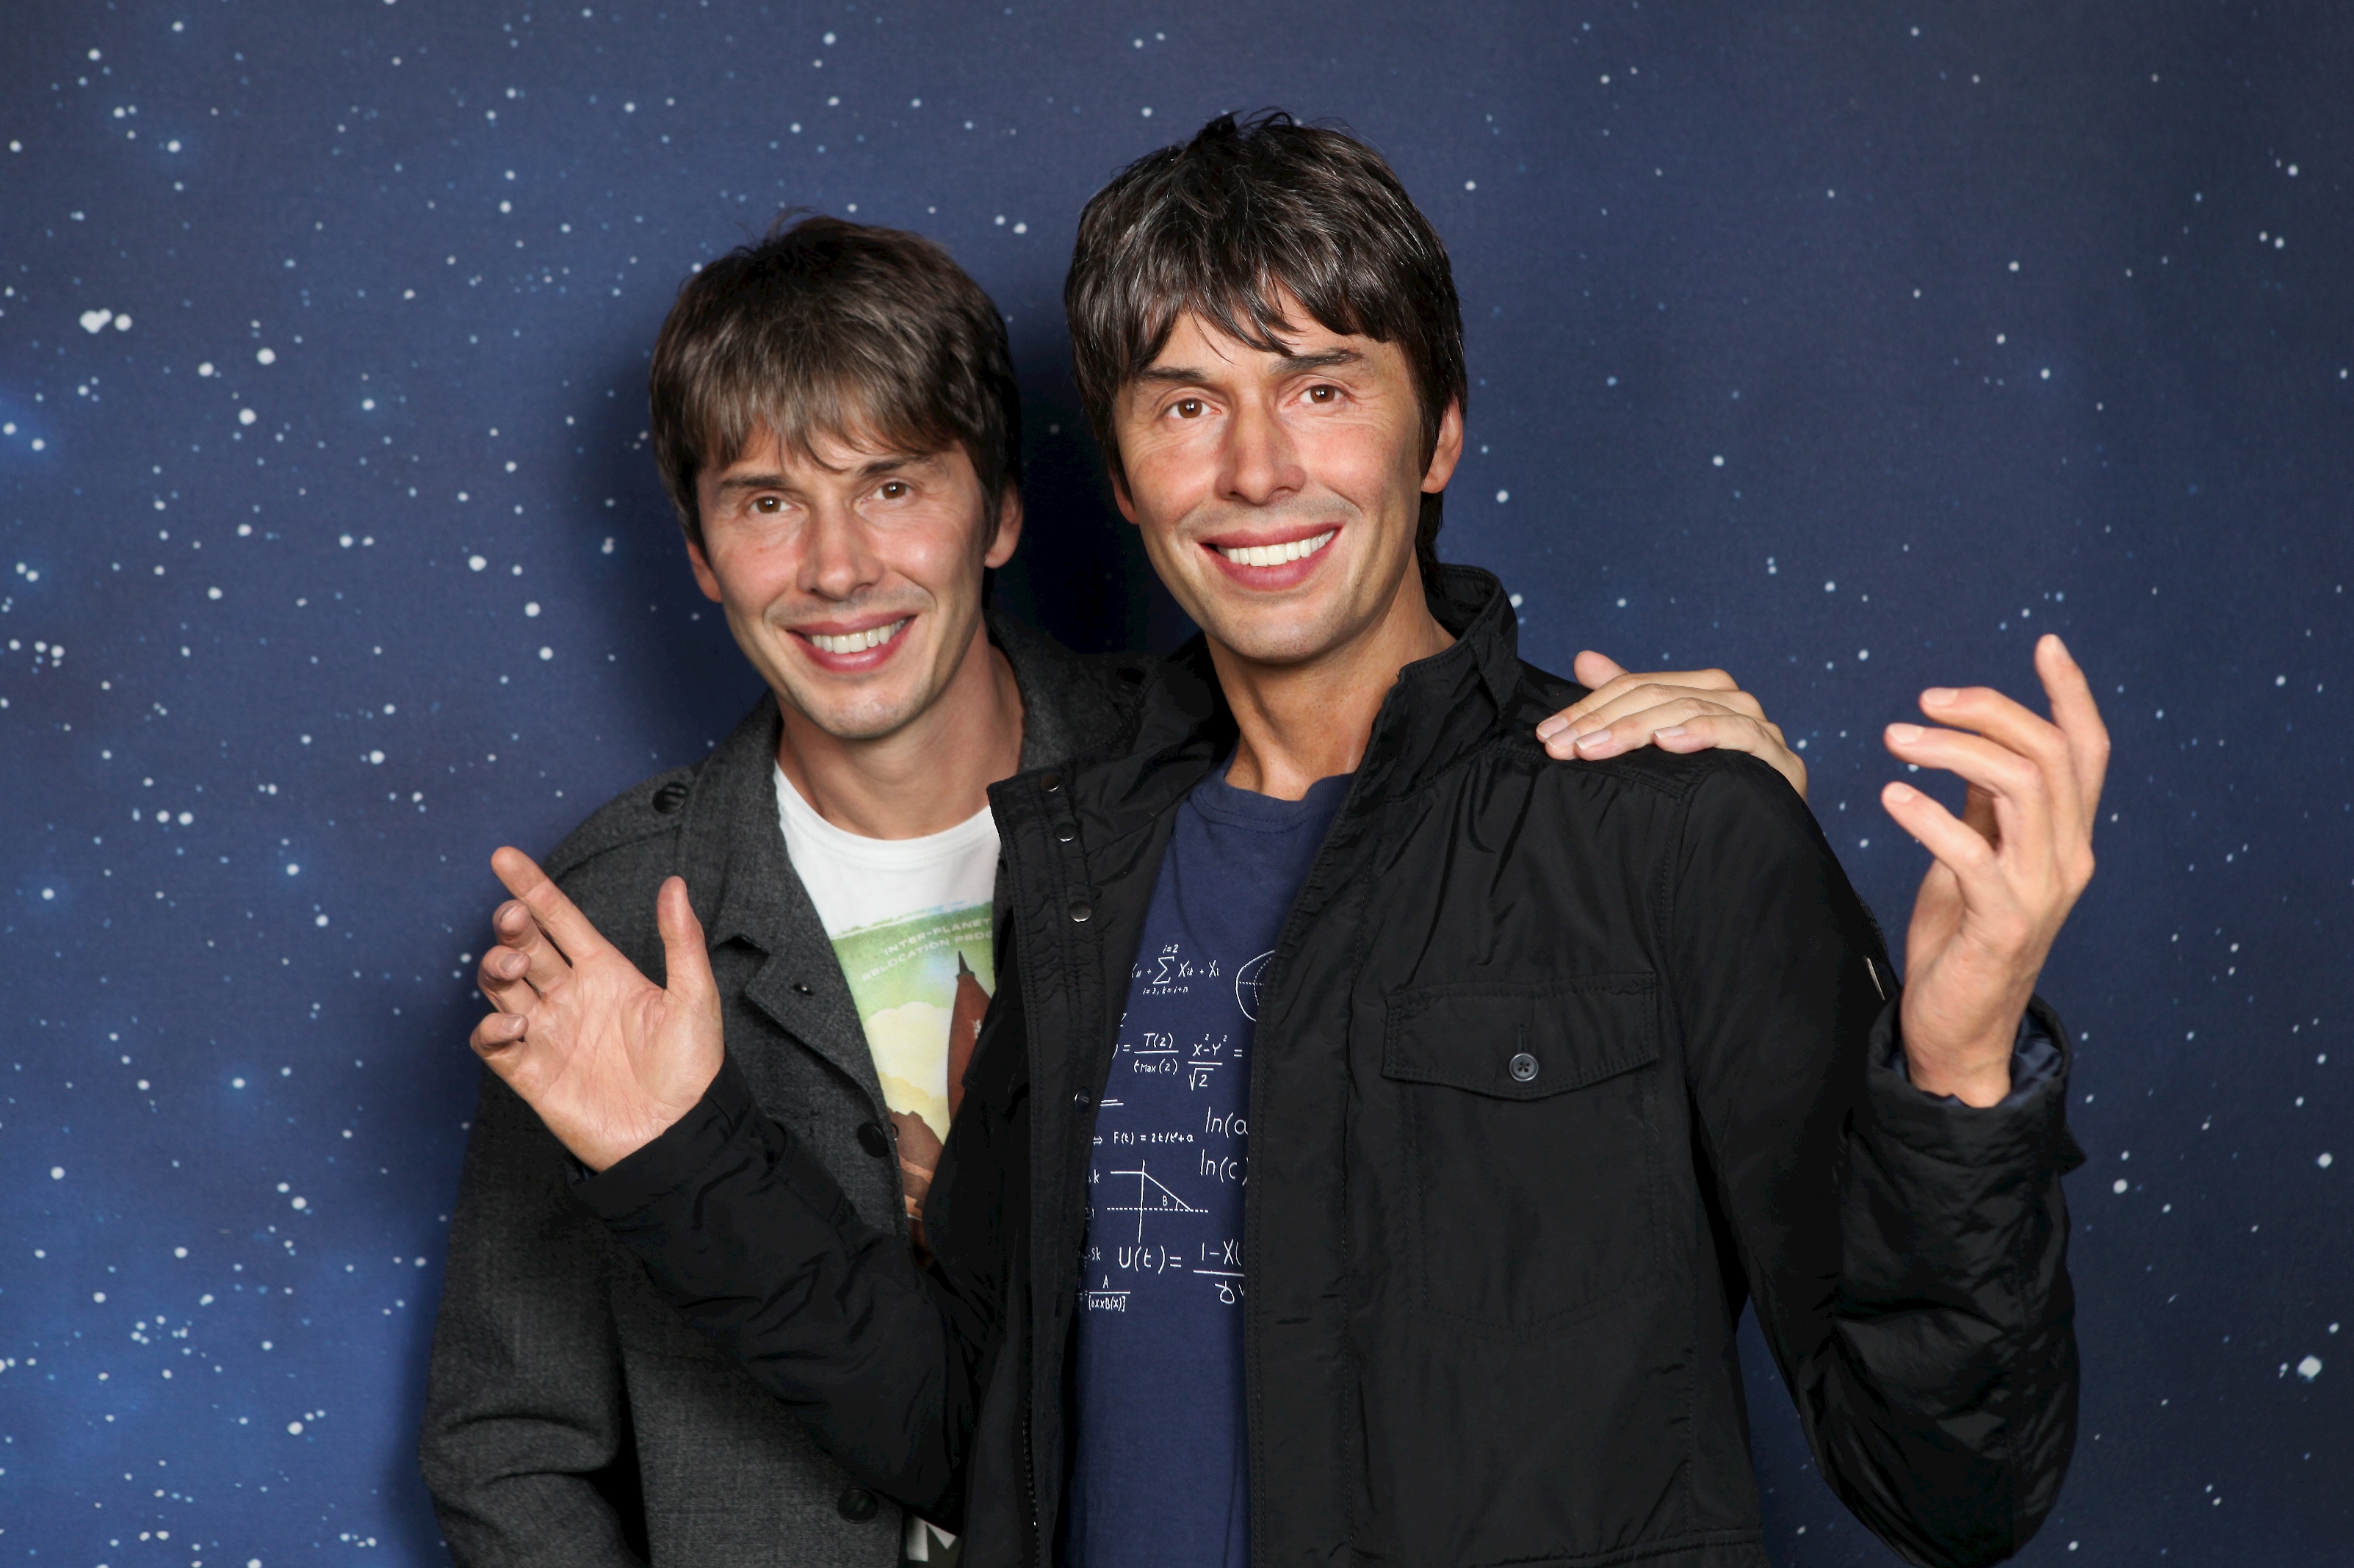 Brian Cox with his arm around his wax figure at Madame Tussauds Blackpool